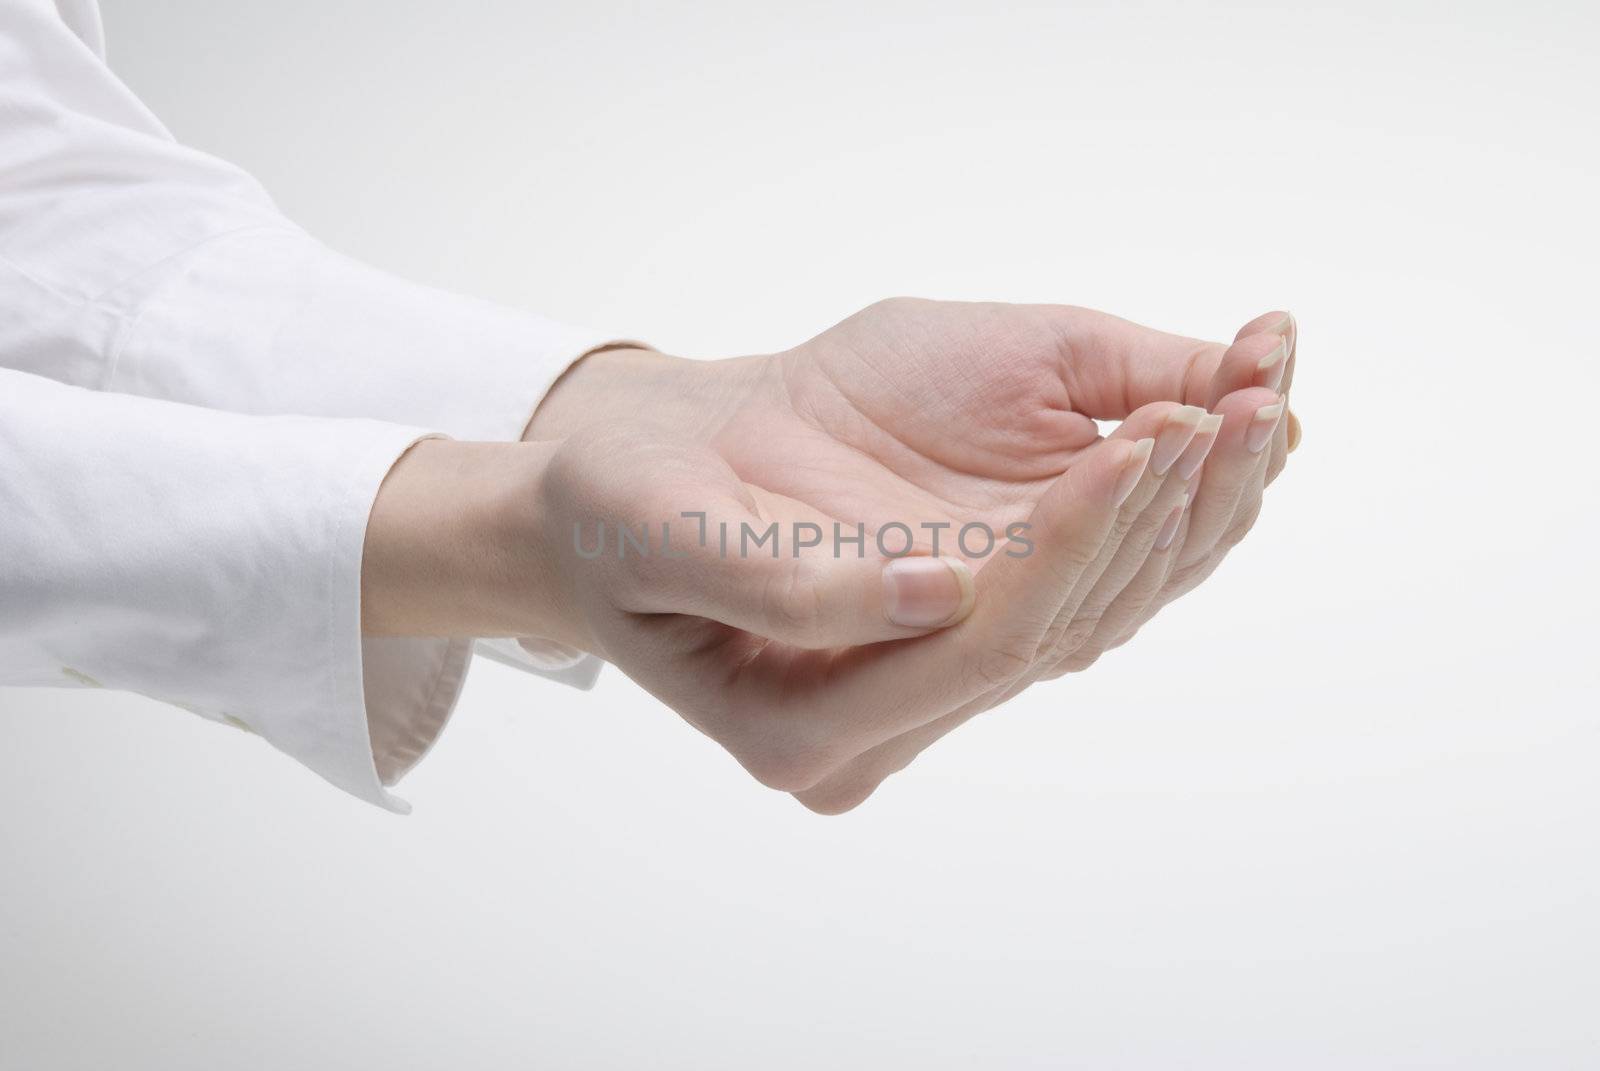 Woman's hand showing support symbol by kirs-ua